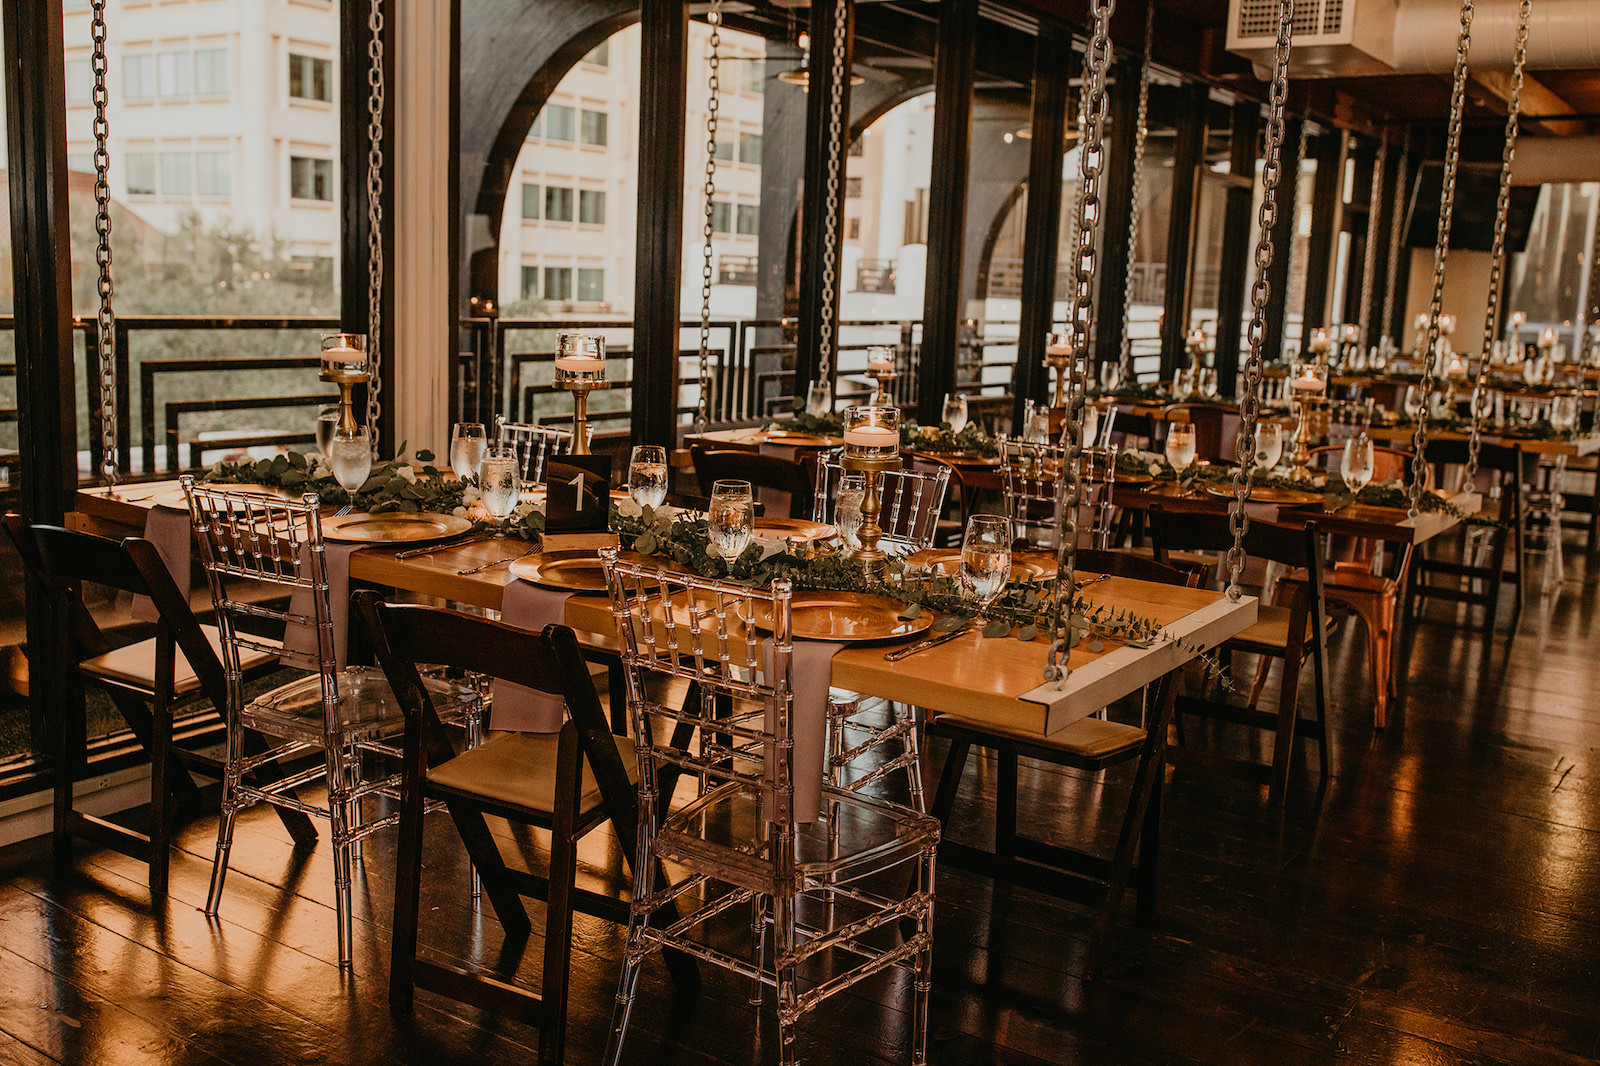 Boho Industrial Wedding Reception with Wooden Tables and Greenery | Unique, Historic Downtown St. Pete Wedding Venue Station House